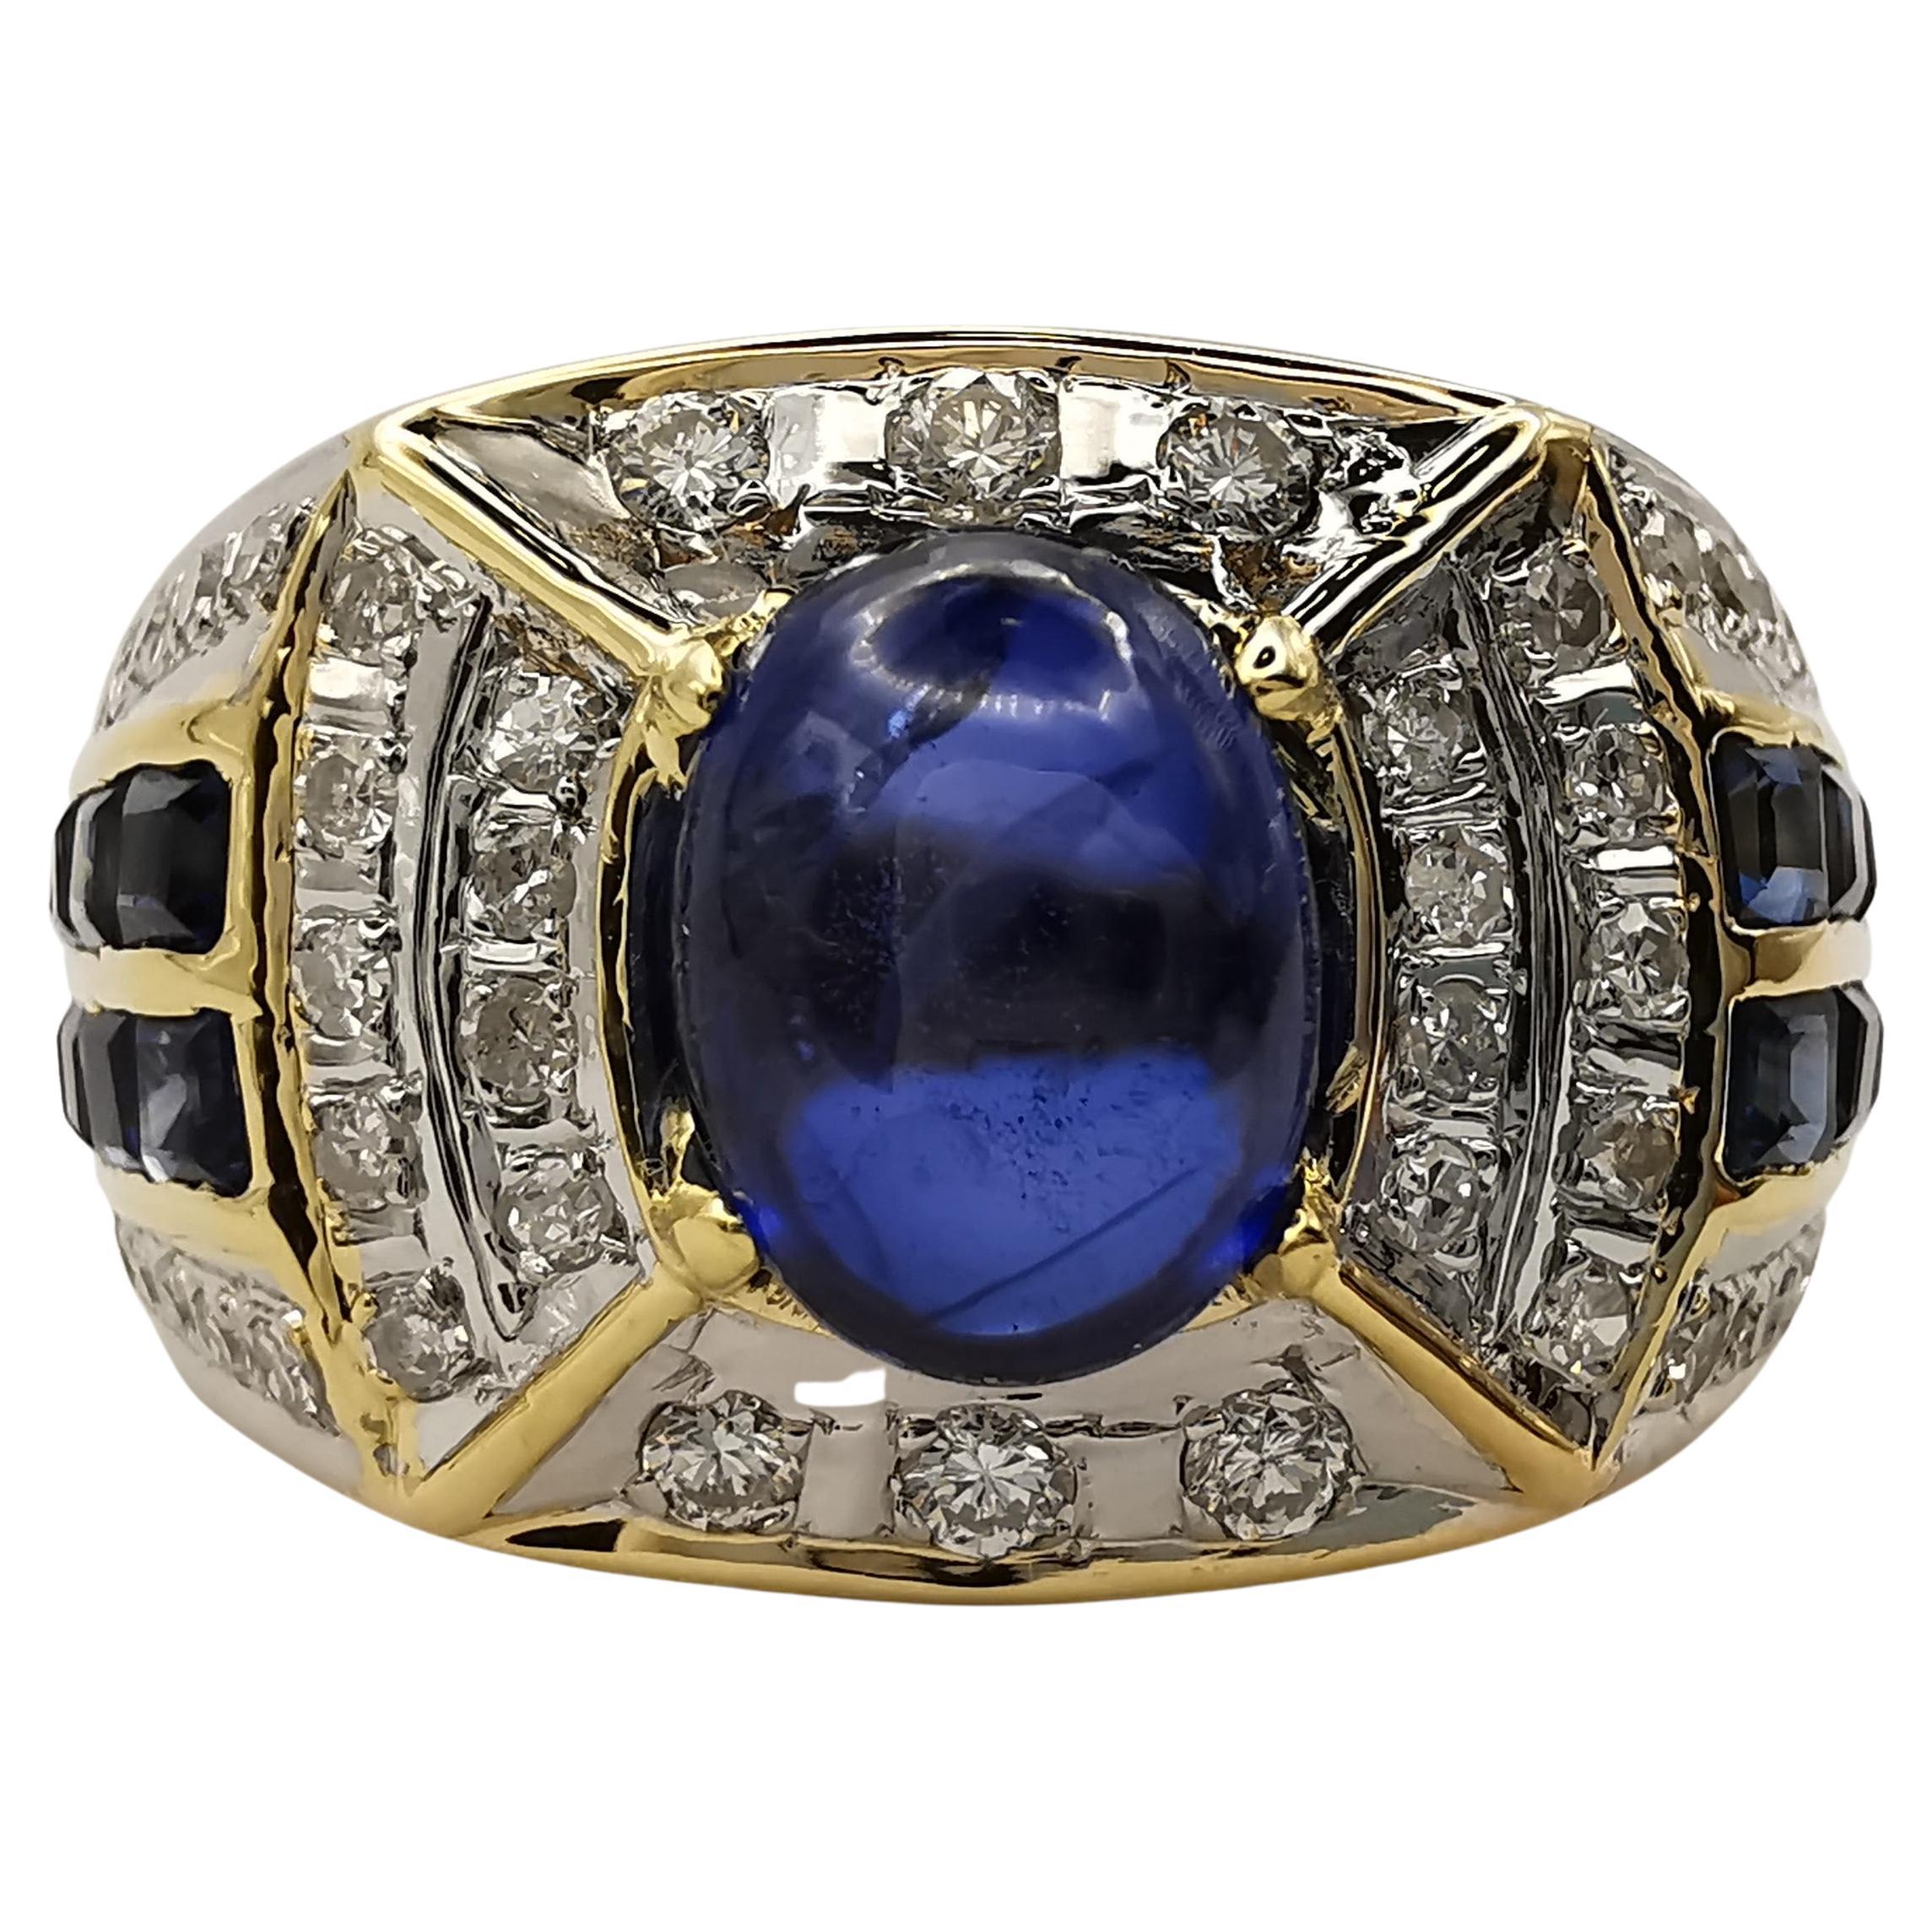 2.11ct Oval Cabochon Royal Blue Sapphire Diamond Art Deco Men's Ring in 14k Gold